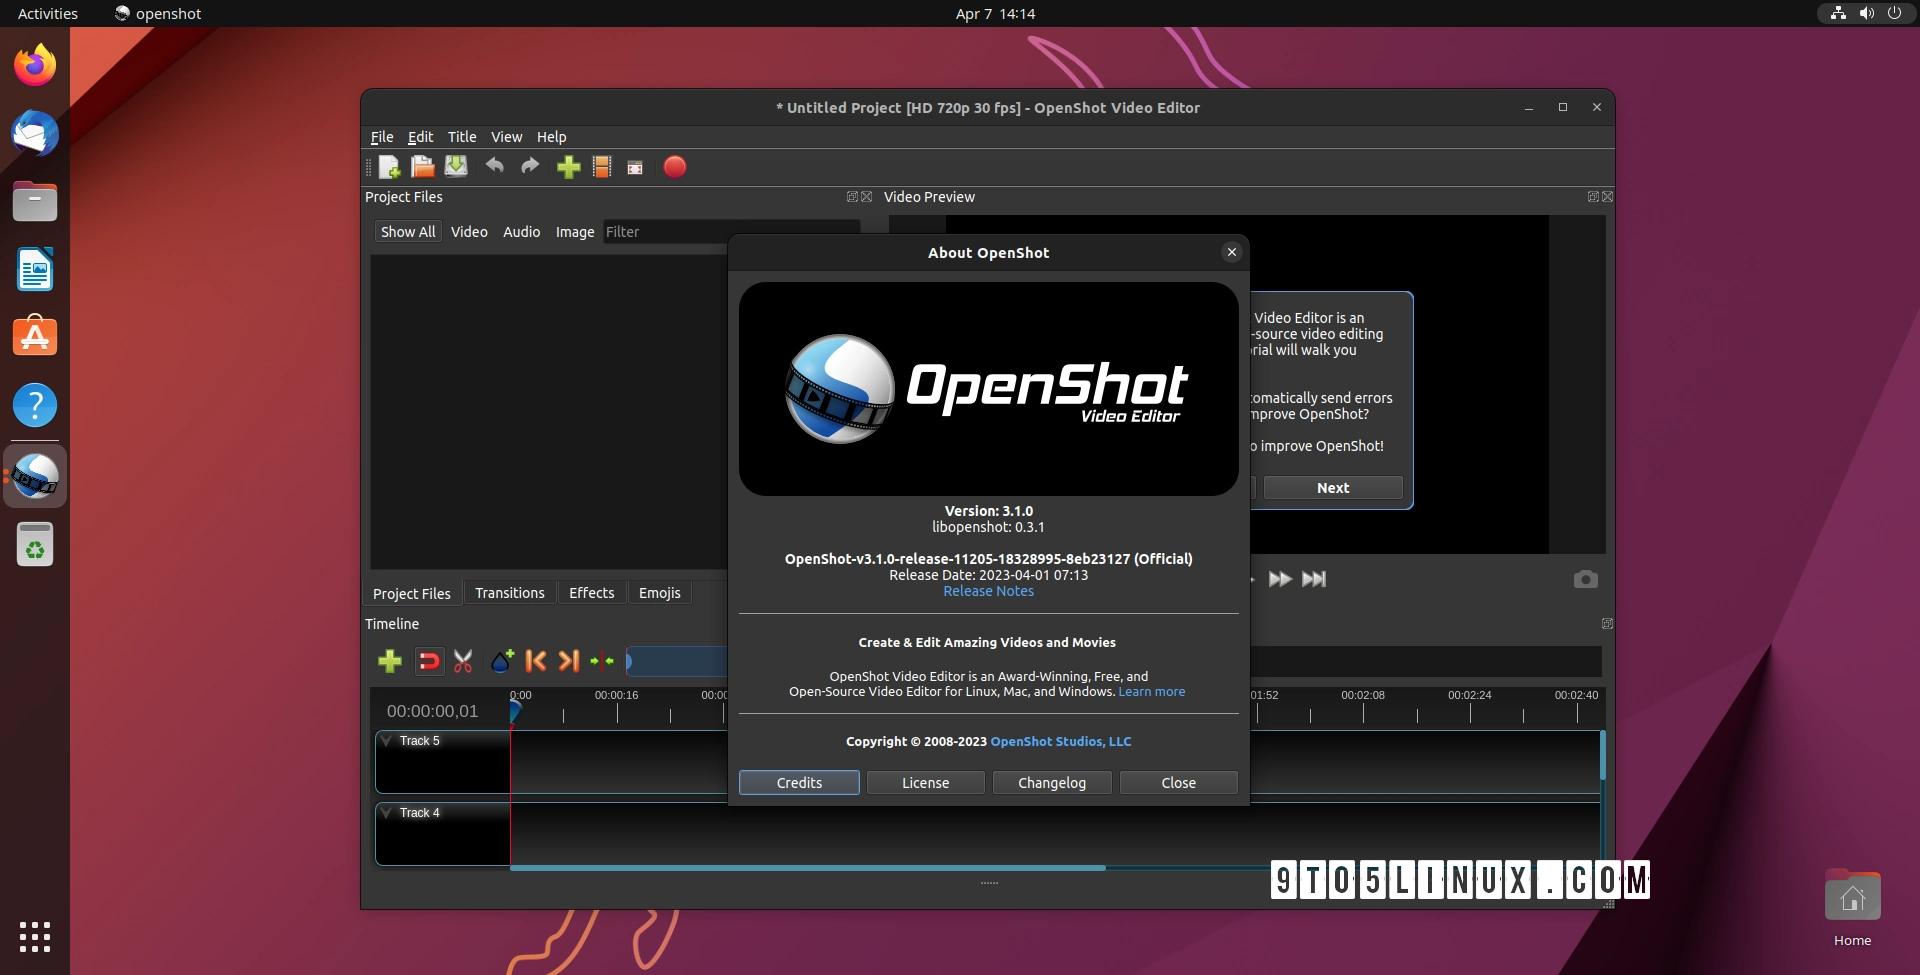 OpenShot 3.1 Open-Source Video Editor Released with Improved Profiles, More